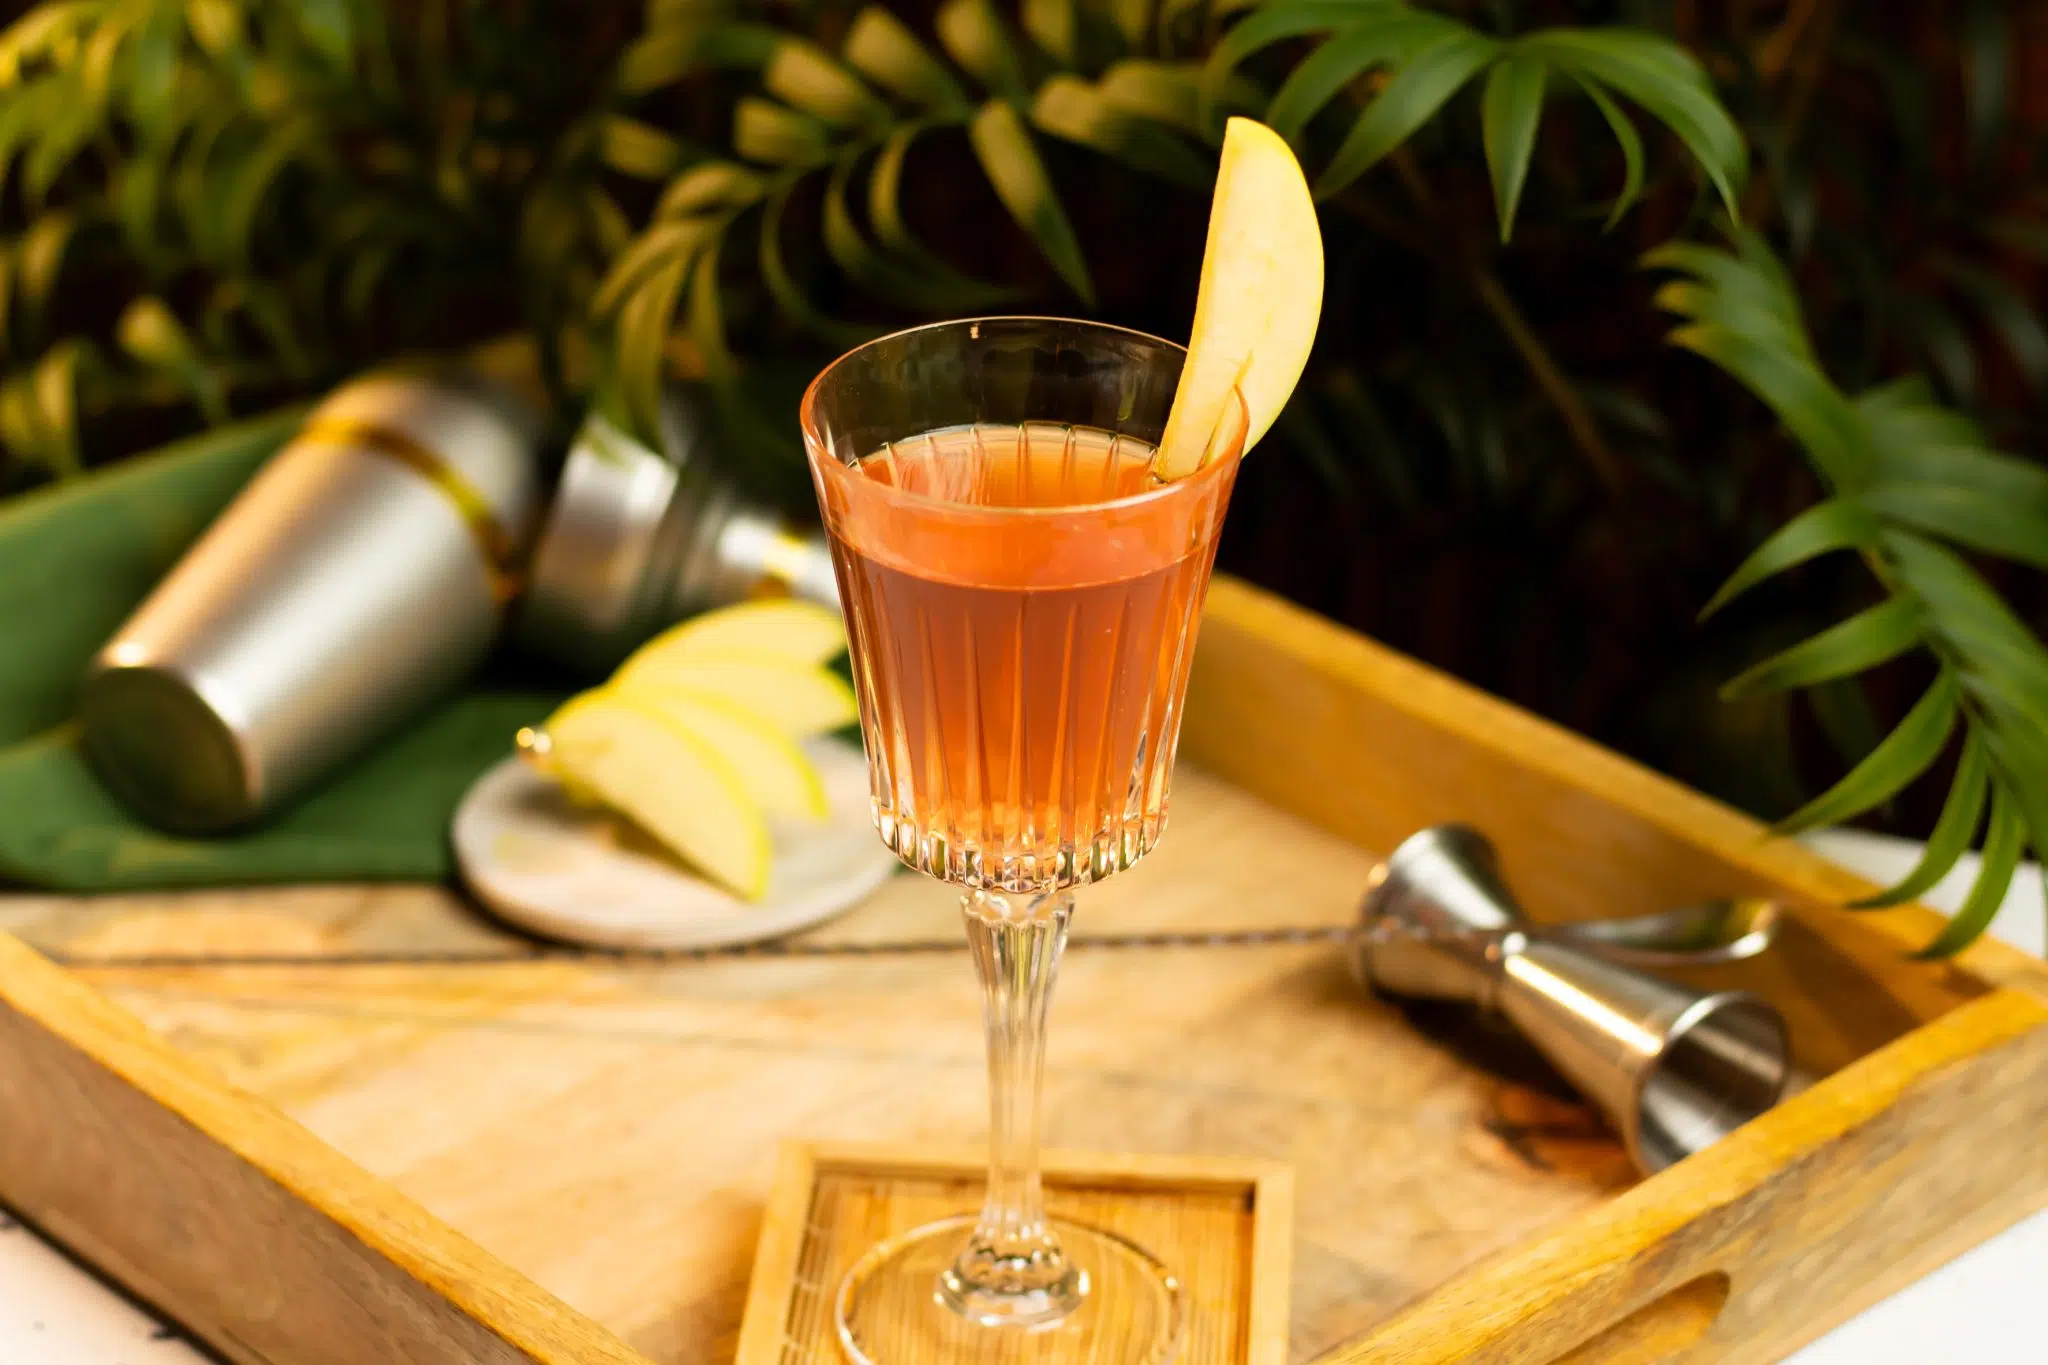 A side shot of a Cranberry Apple Mimosa in a champagne flute on a wooden coaster and tray surrounded by a shaker, a bar spoon, a jigger, a green cloth and a white coaster with apple slices